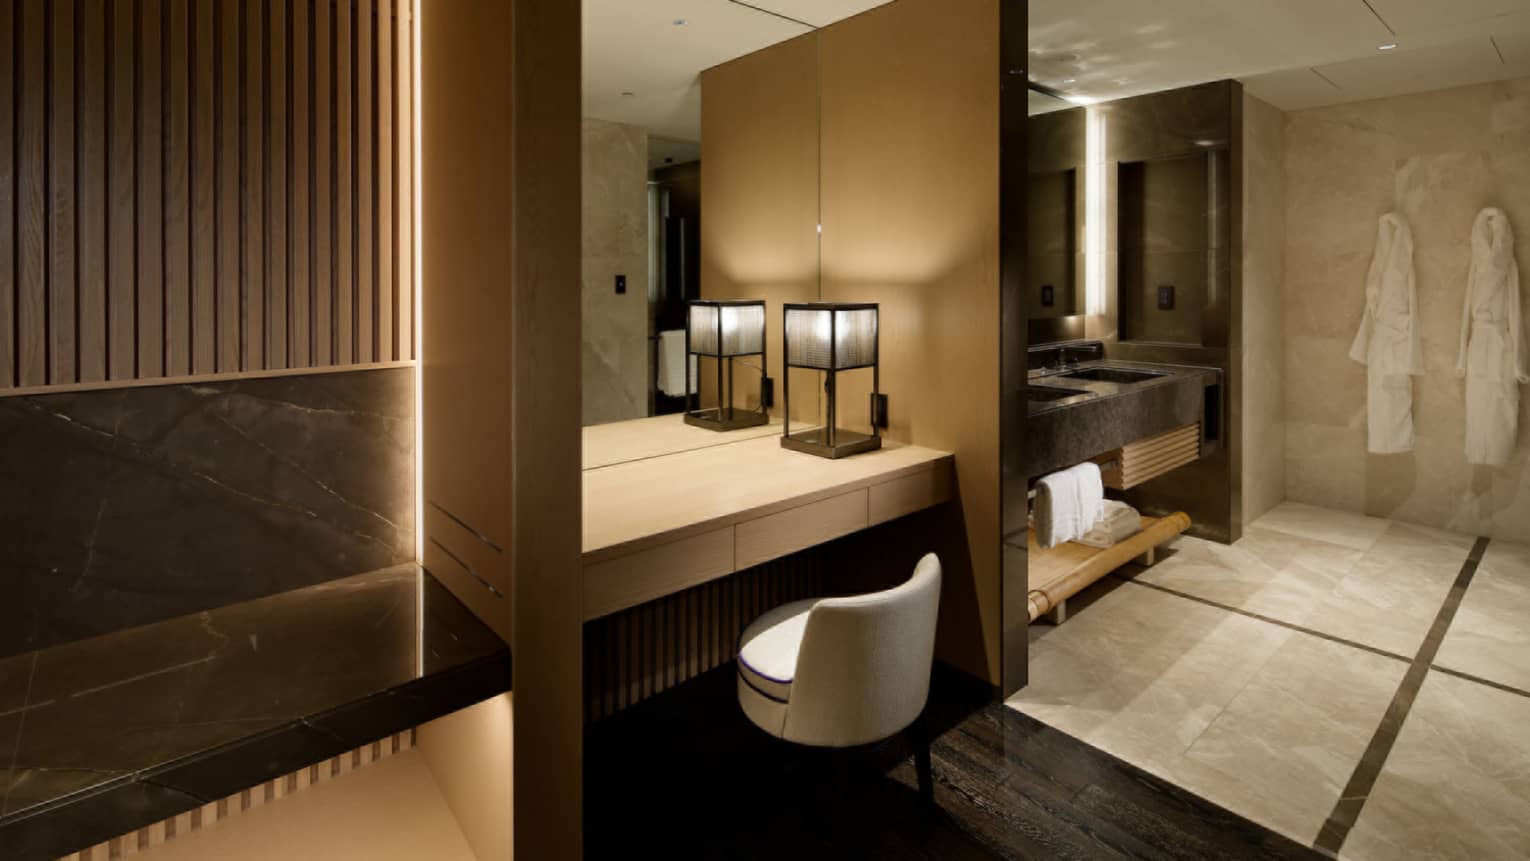 Large and modern, Japanese-design bathroom with vanity area